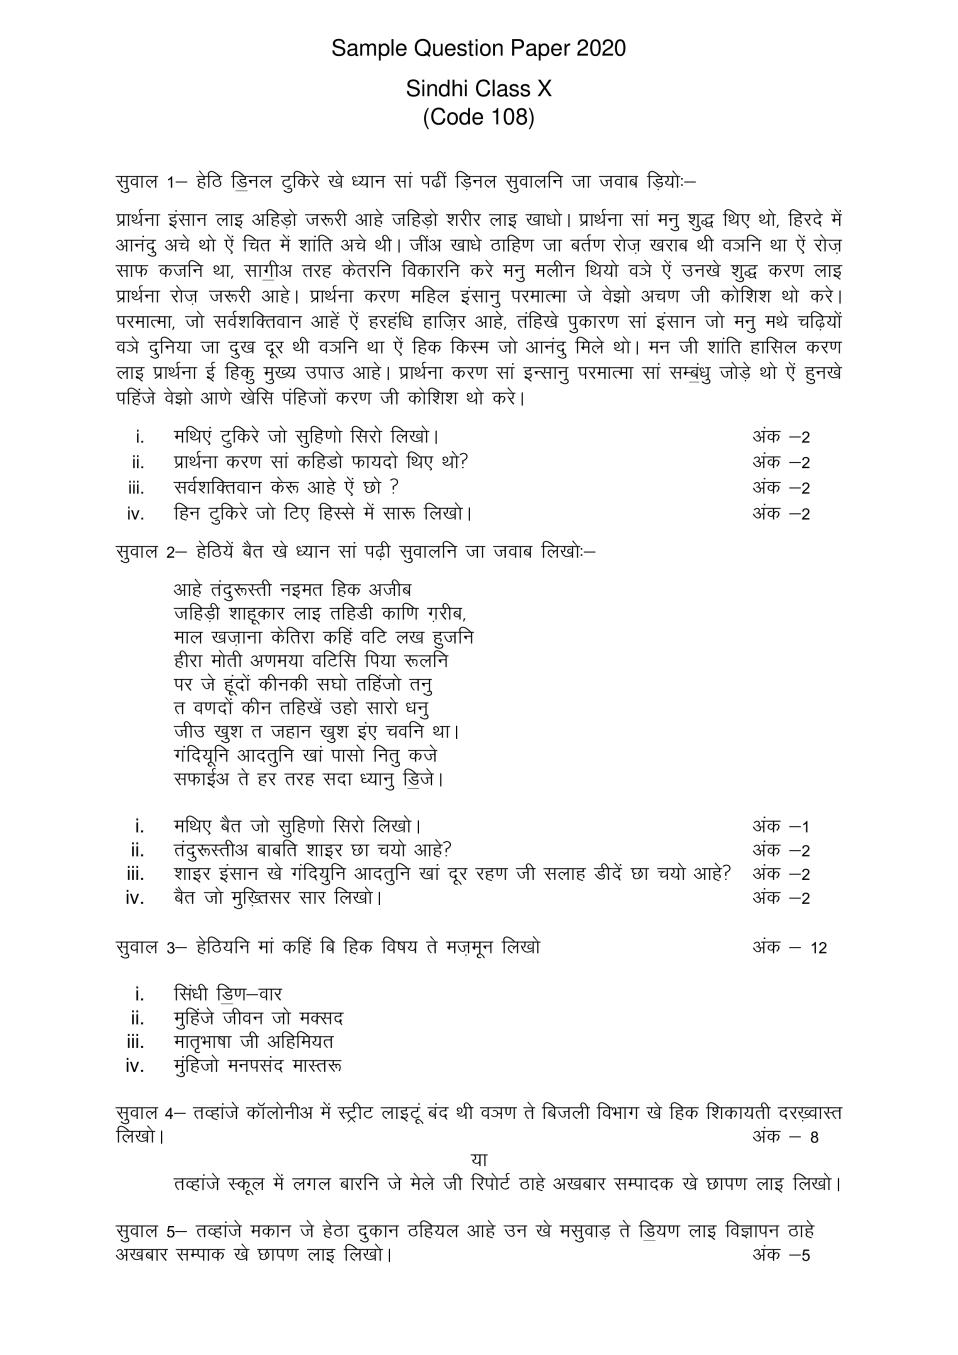 CBSE Class 10 Sample Paper 2020 for Sindhi - Page 1